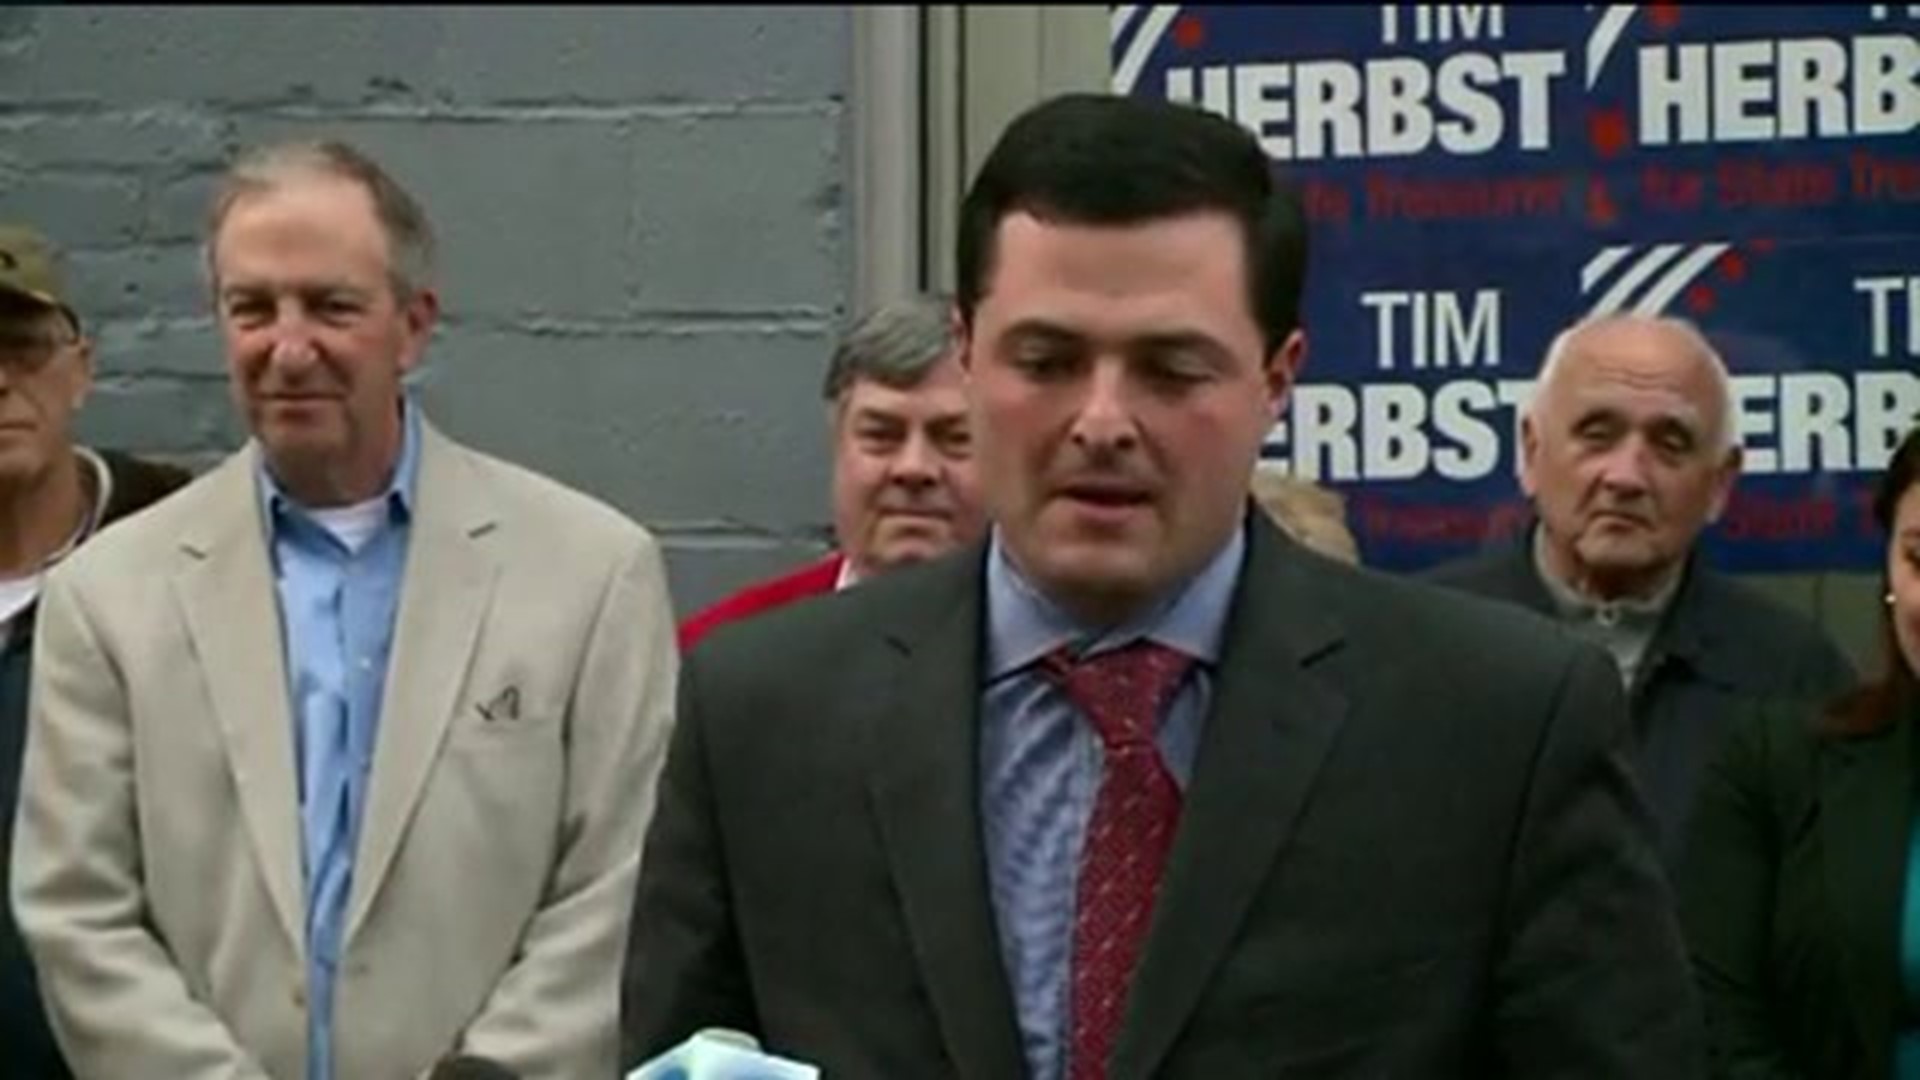 Tim Herbst concedes after tight treasurer`s race